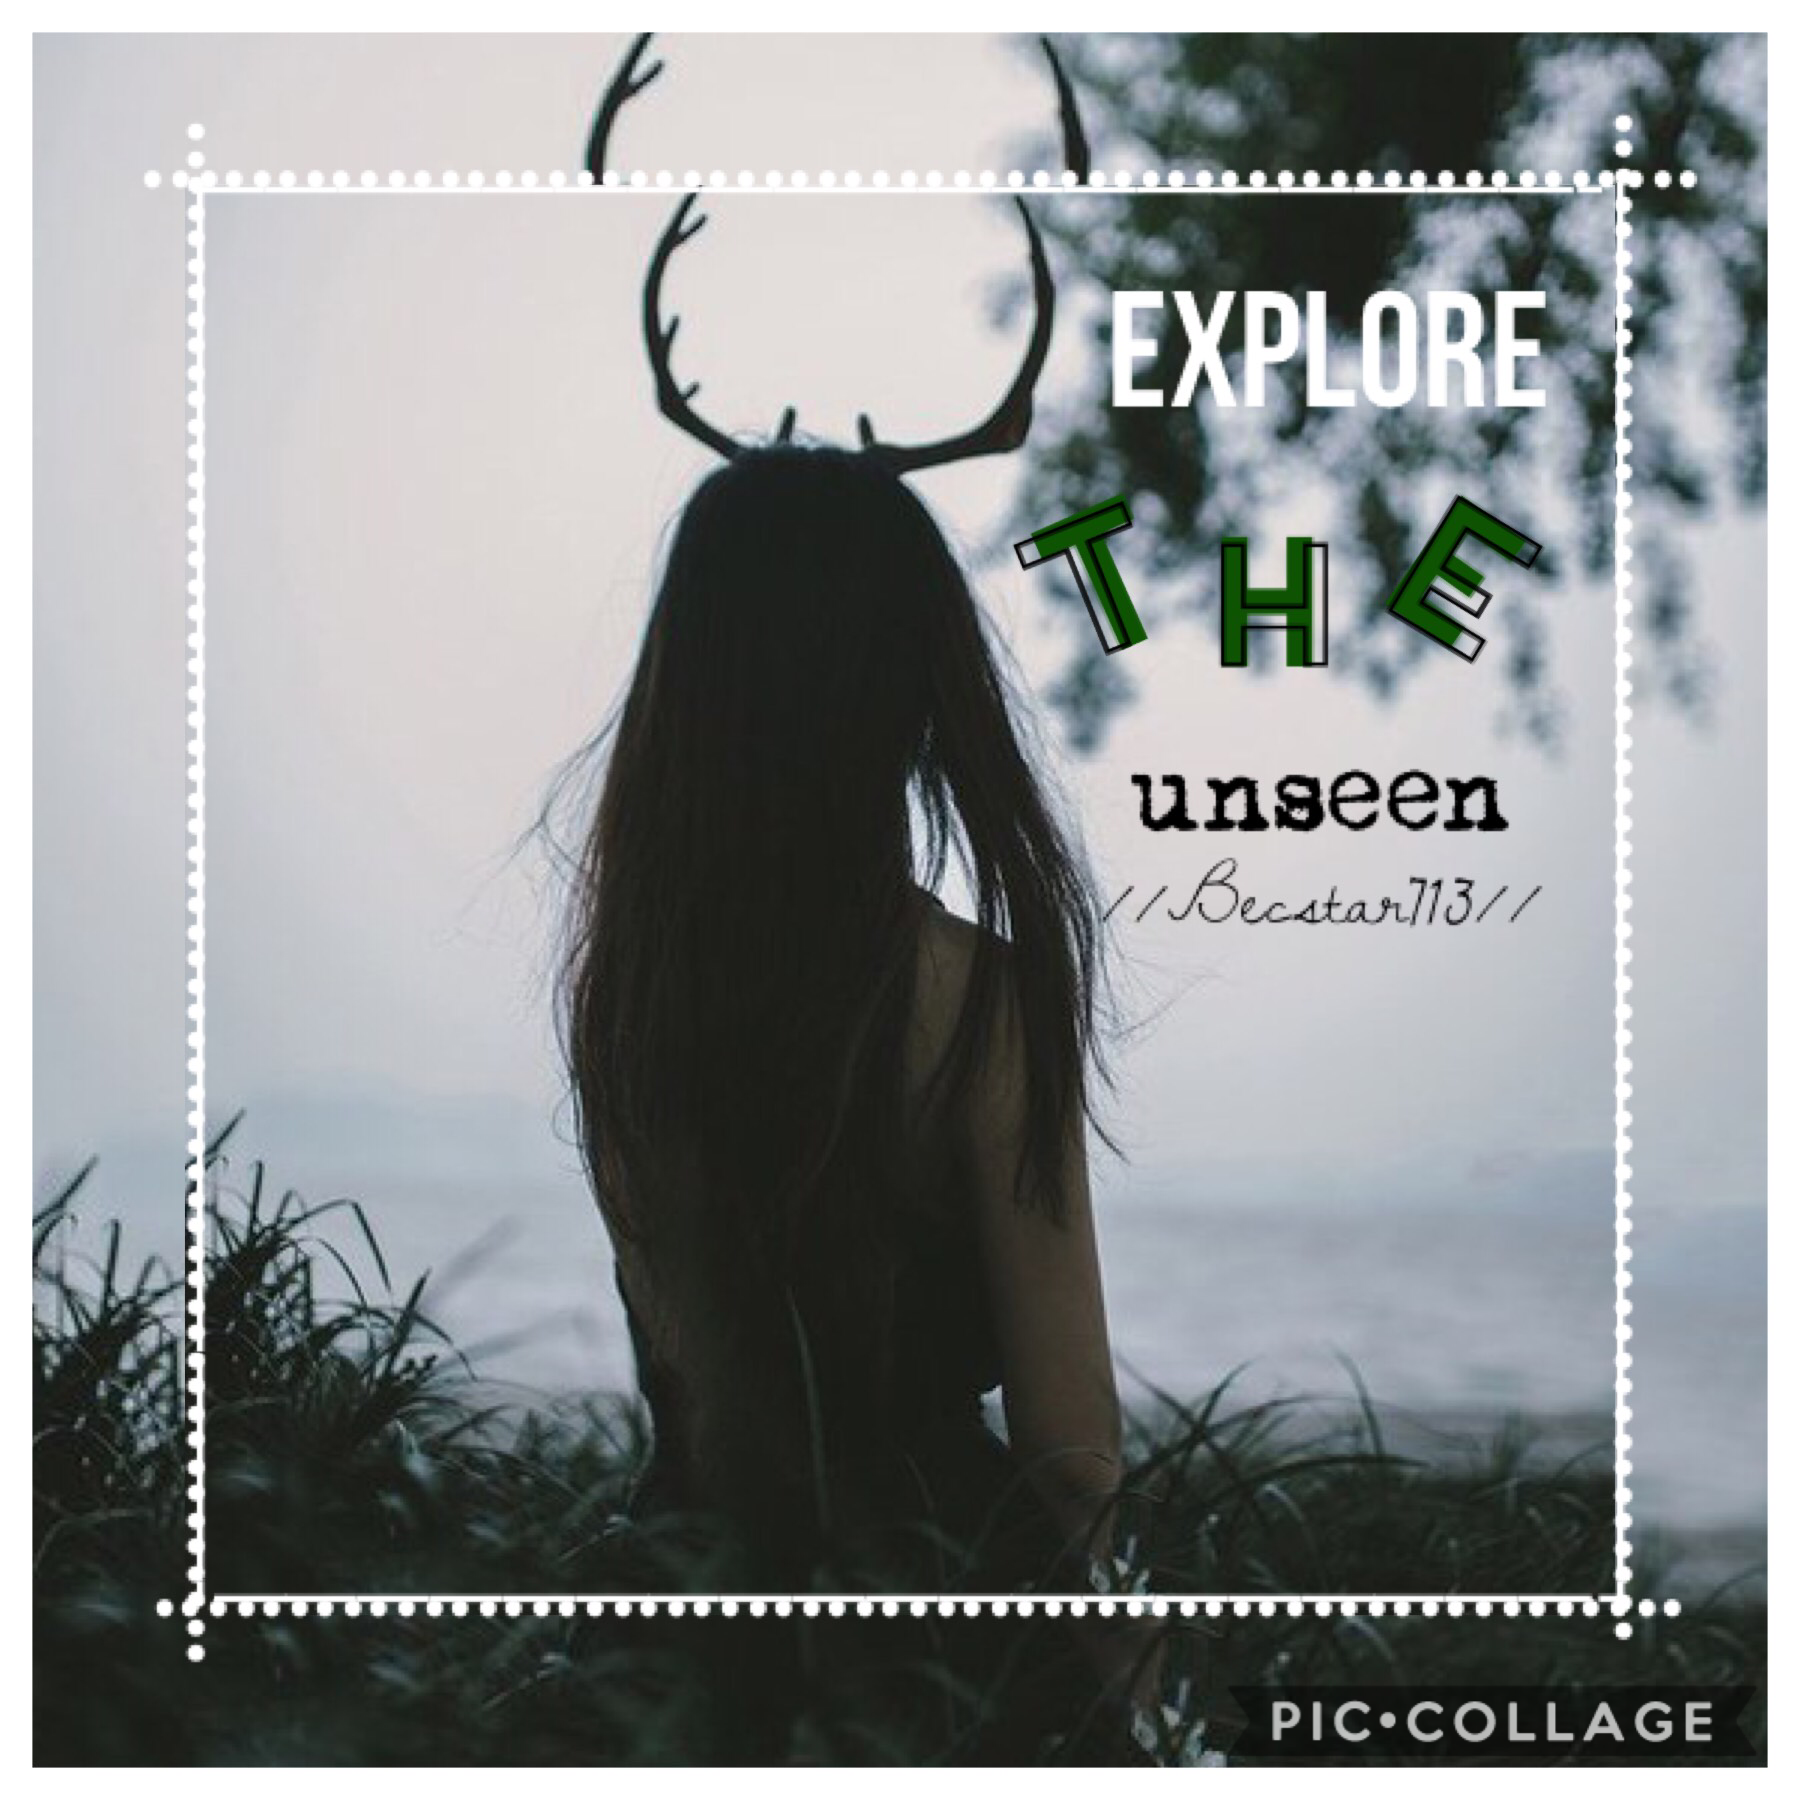 Explore the unseen! Tap!
Hi, another new theme not sure what else to do please comment on which theme I should do. Also please rate /10.